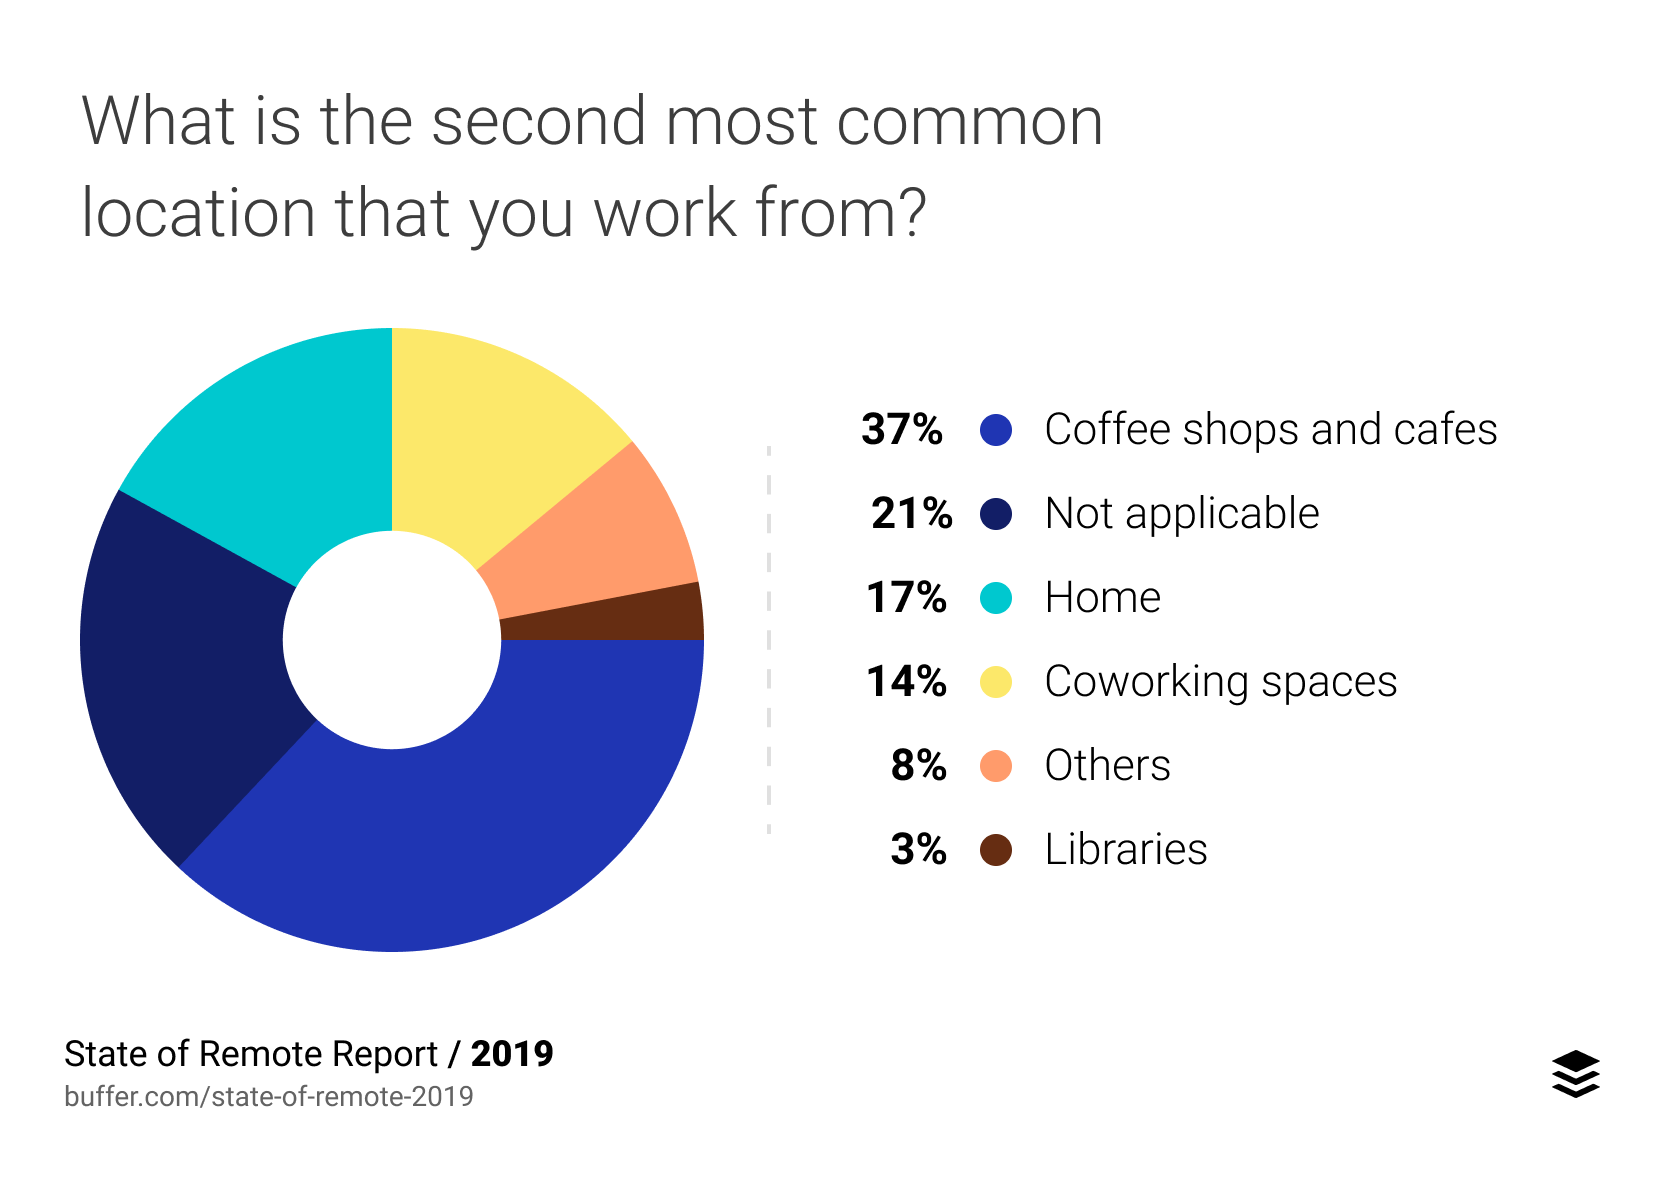 What is the second most common location that you work from?